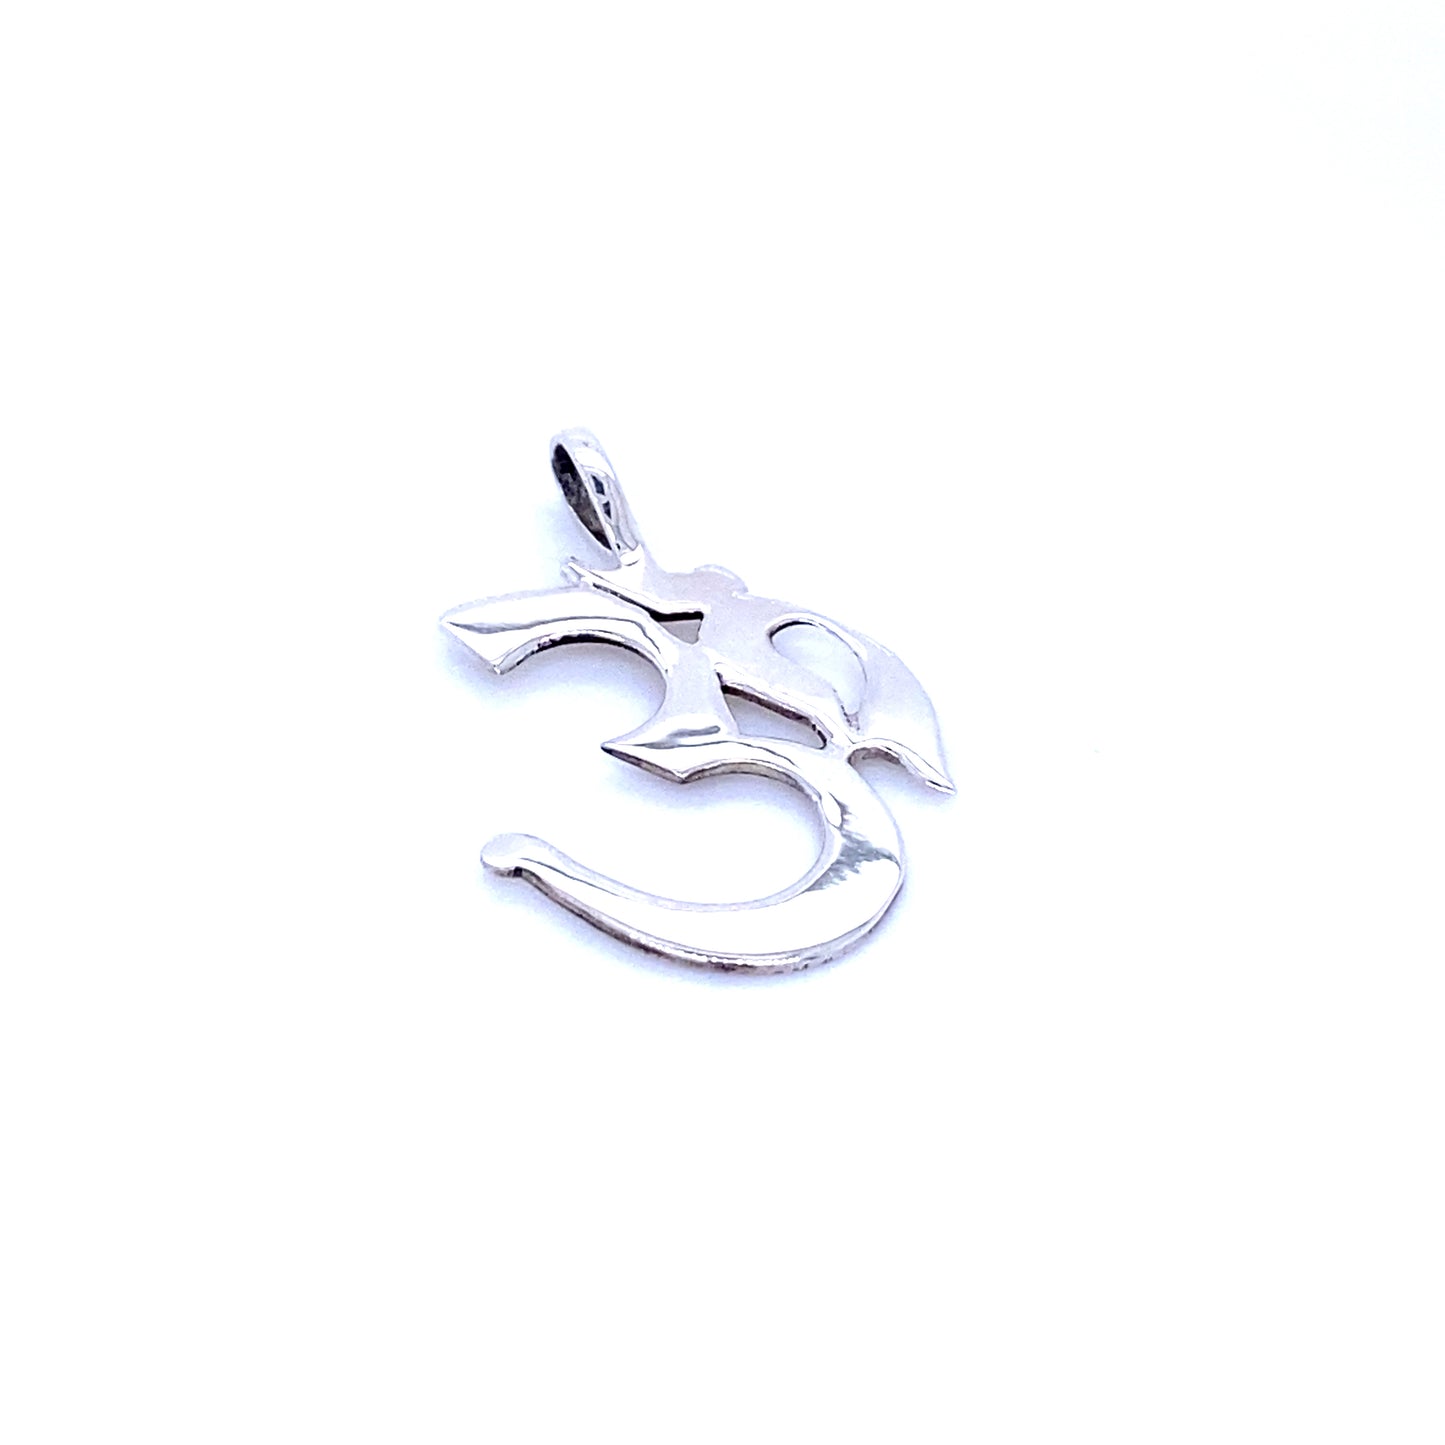 A Simple Om Pendant, symbolizing balance, from Super Silver, on a white background.